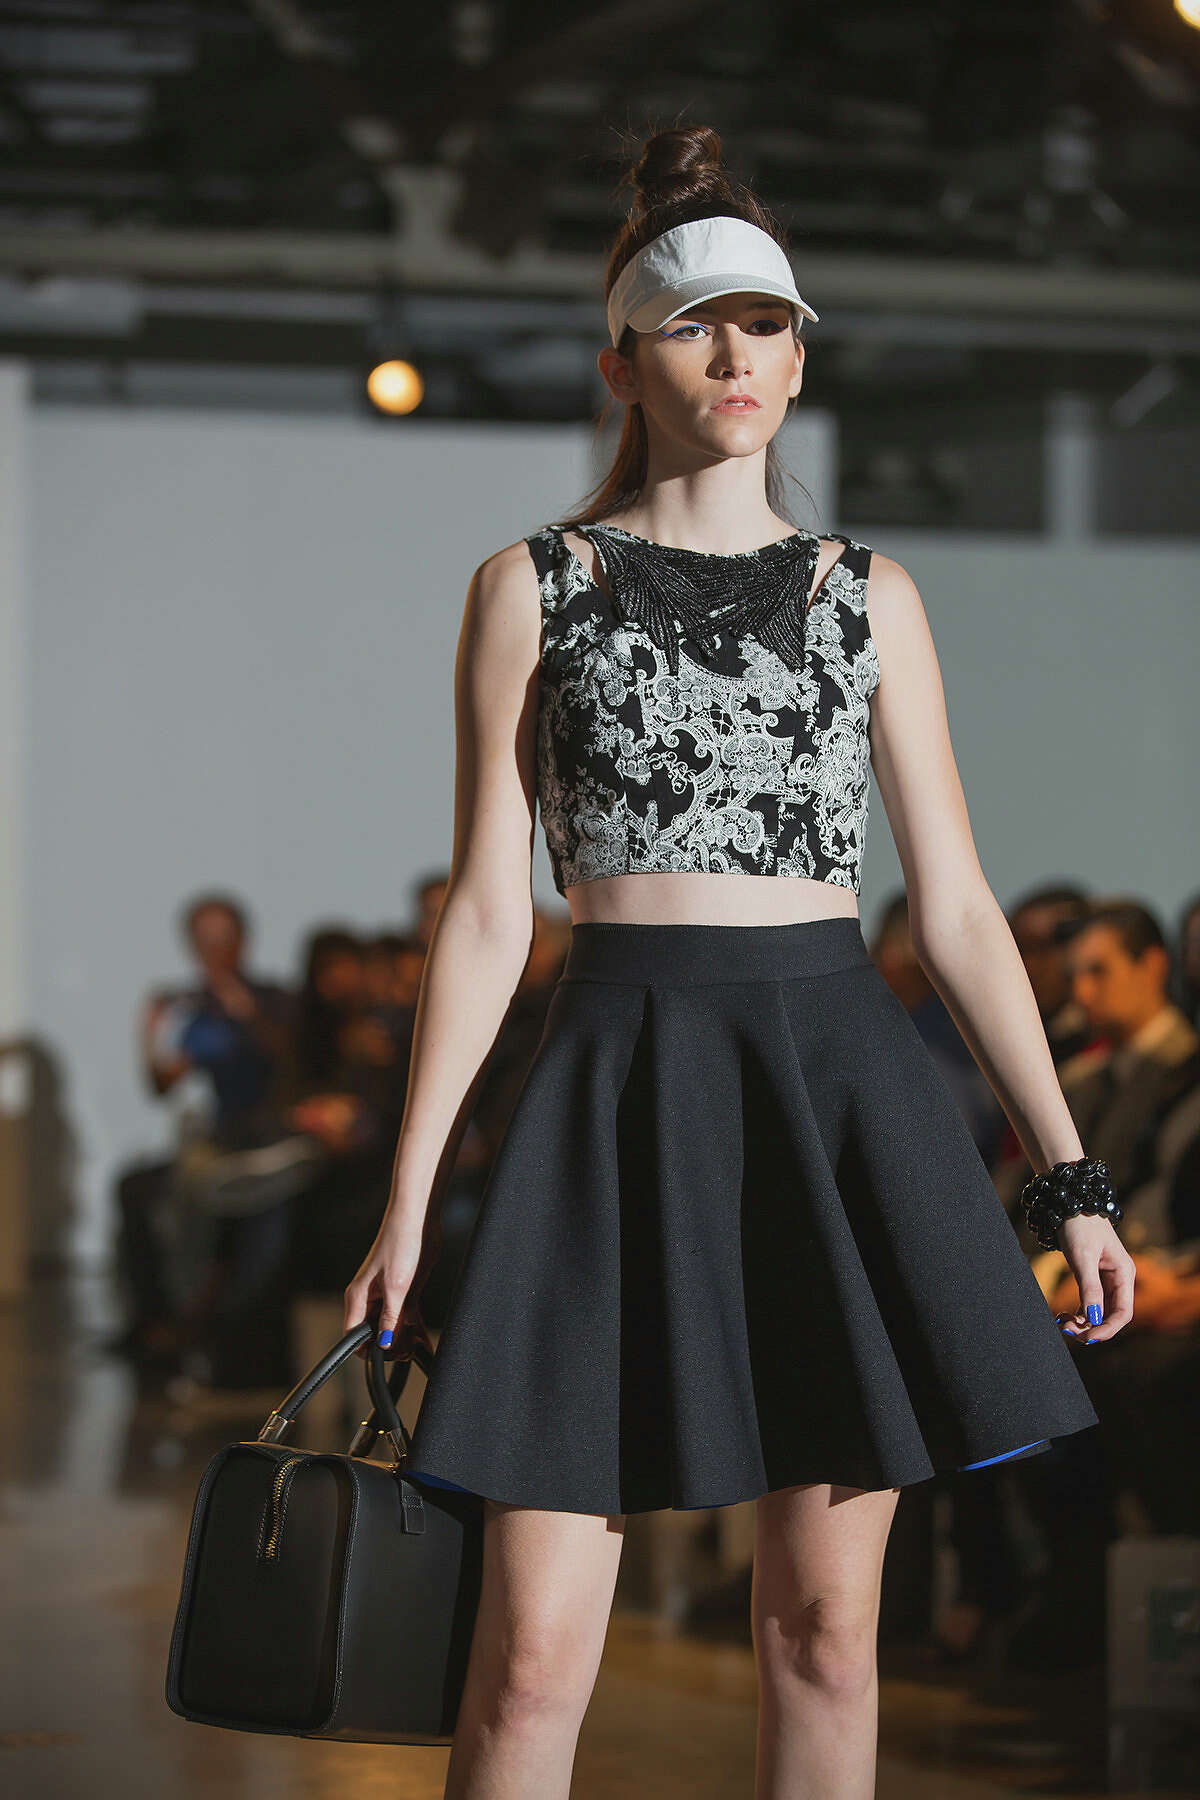 Here's a look from Samantha Plasencia's spring 2015 collection shown during Fashion Week San Antonio. The "Project Runway" contestant and University of the Incarnate Word grad sent out black and white collection with pops of bright cobalt blue in mesh, cotton and neoprene. Many of the separates referenced fashion's current athleisure trend but she also produced beautiful and edgy boxy baby doll dresses, full skirts, on-trend crop tops and fitted trousers, all very wearable.